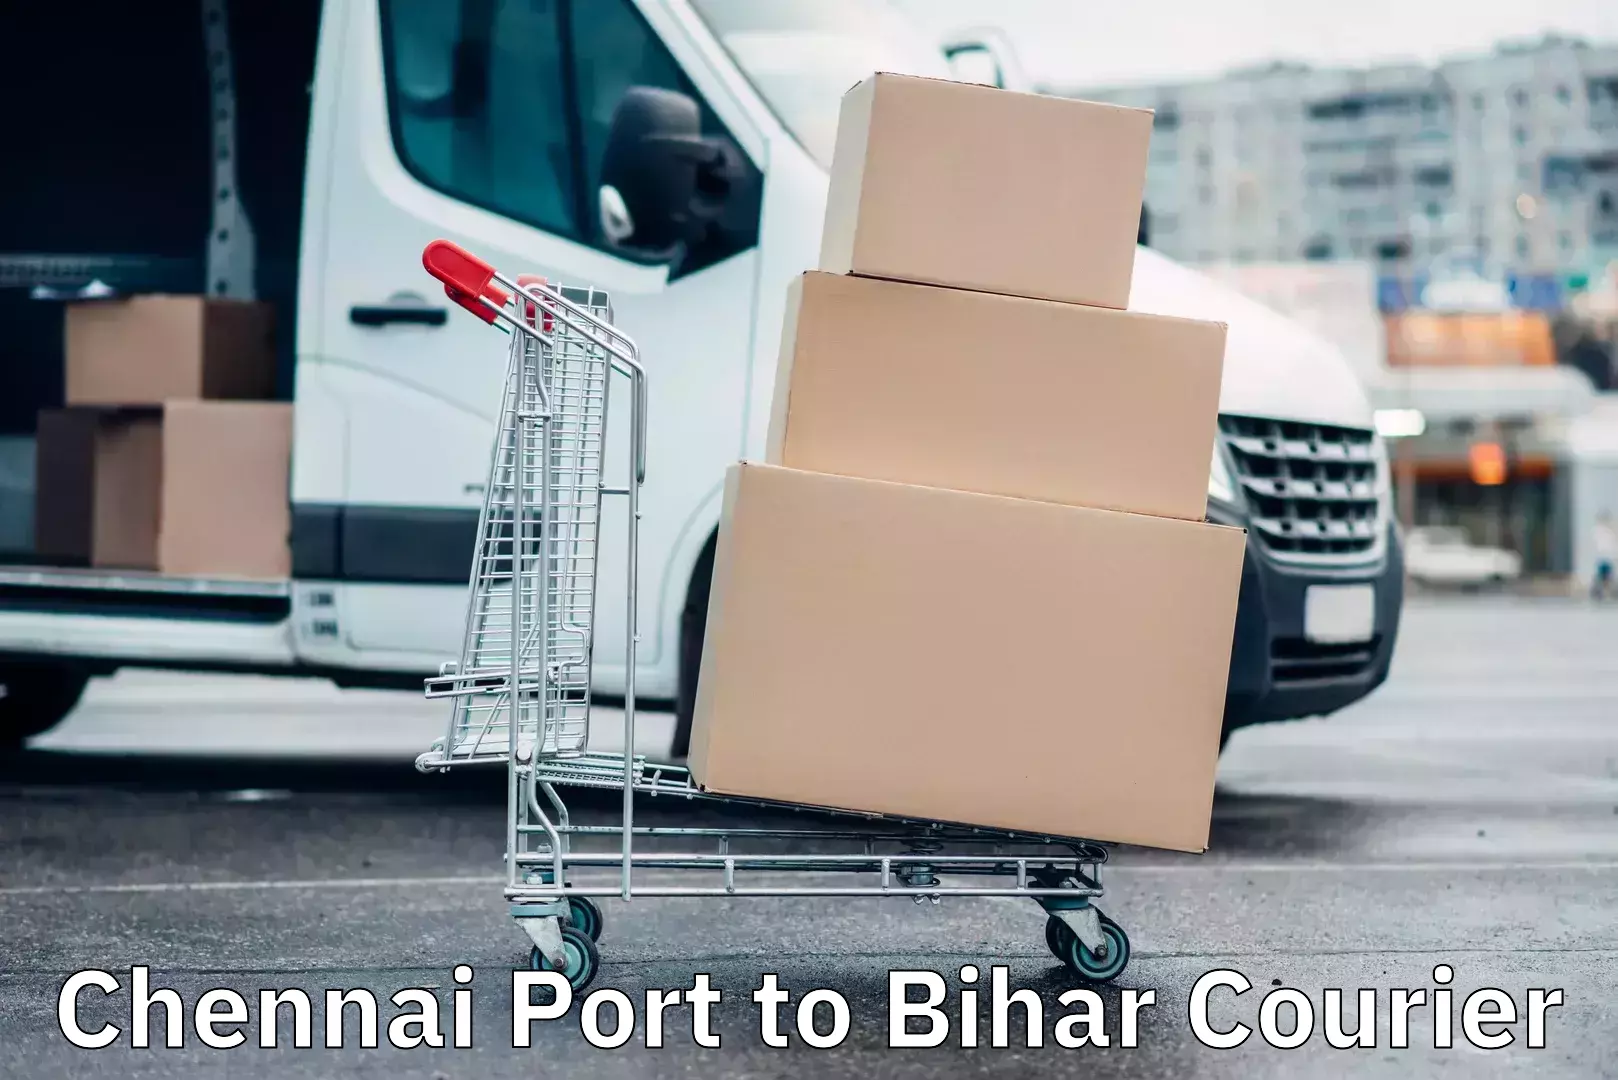 Express delivery network Chennai Port to Bihar